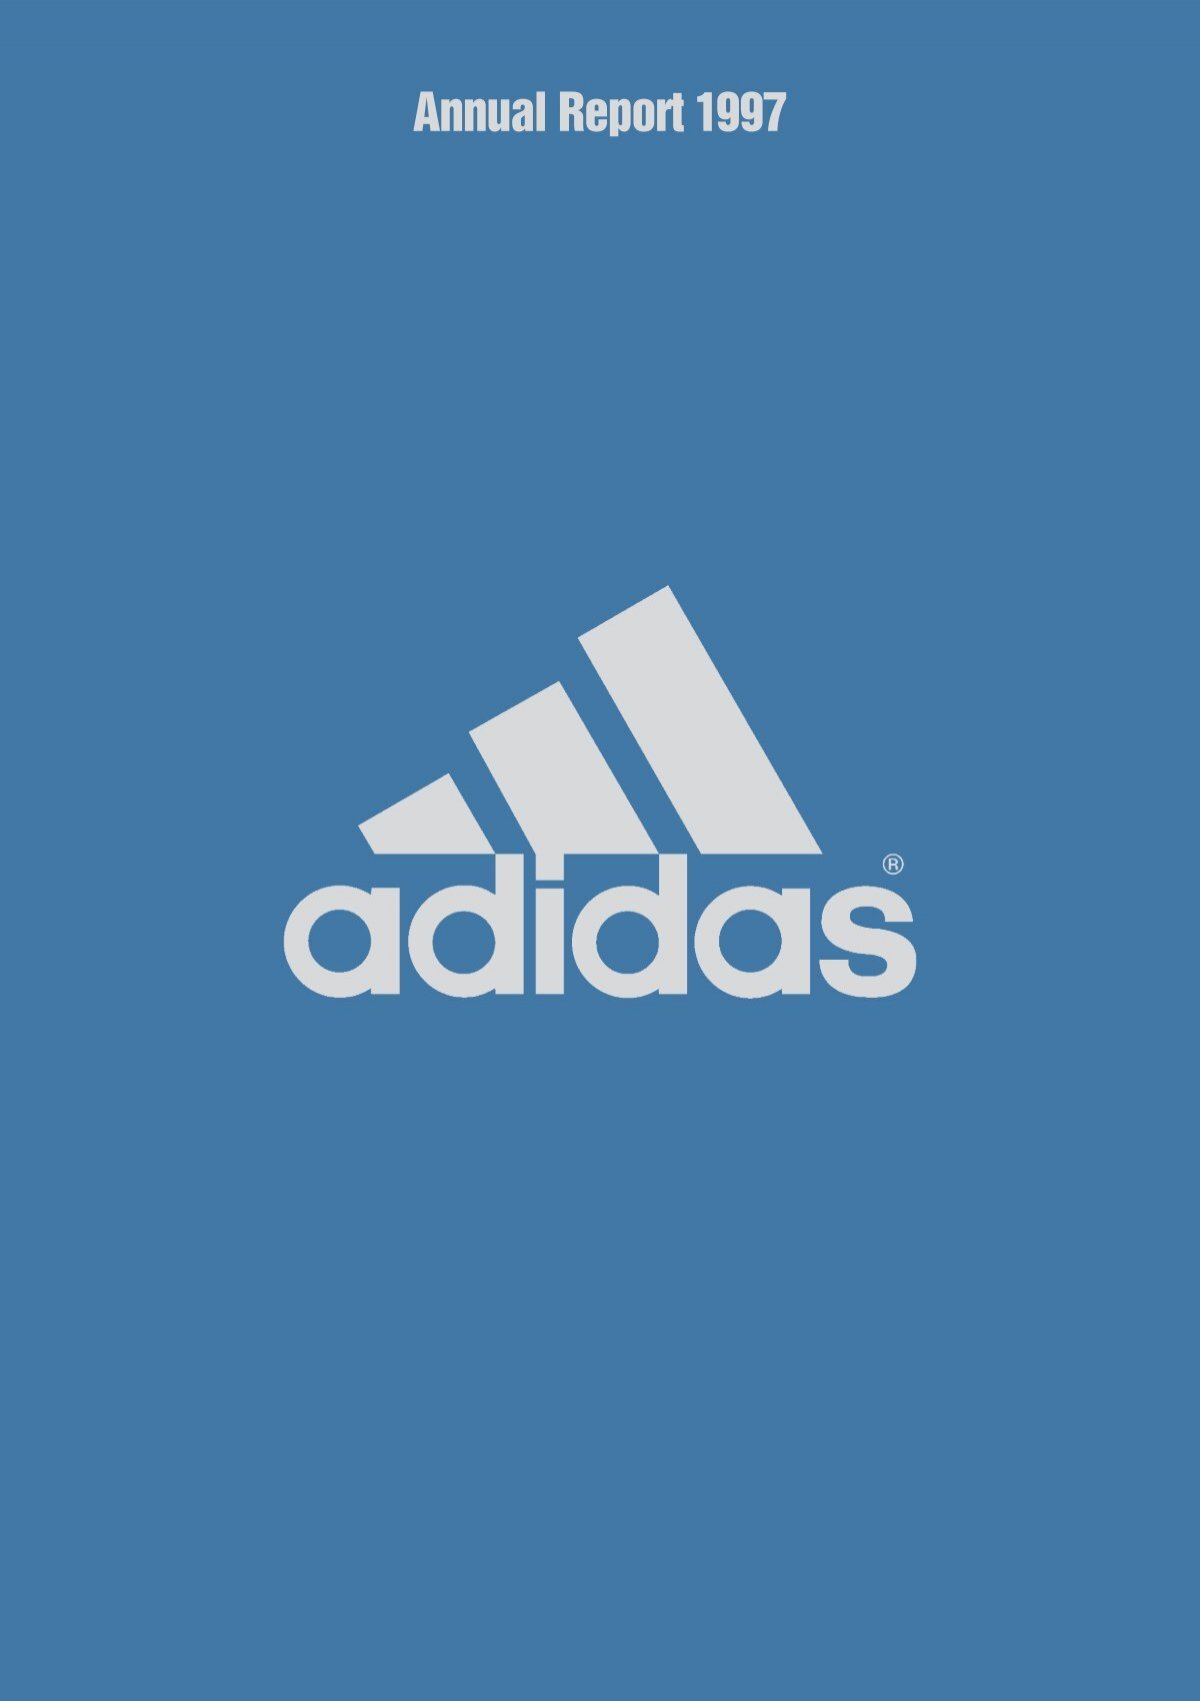 Annual Report 1997 (1.5 MB PDF) - adidas Group